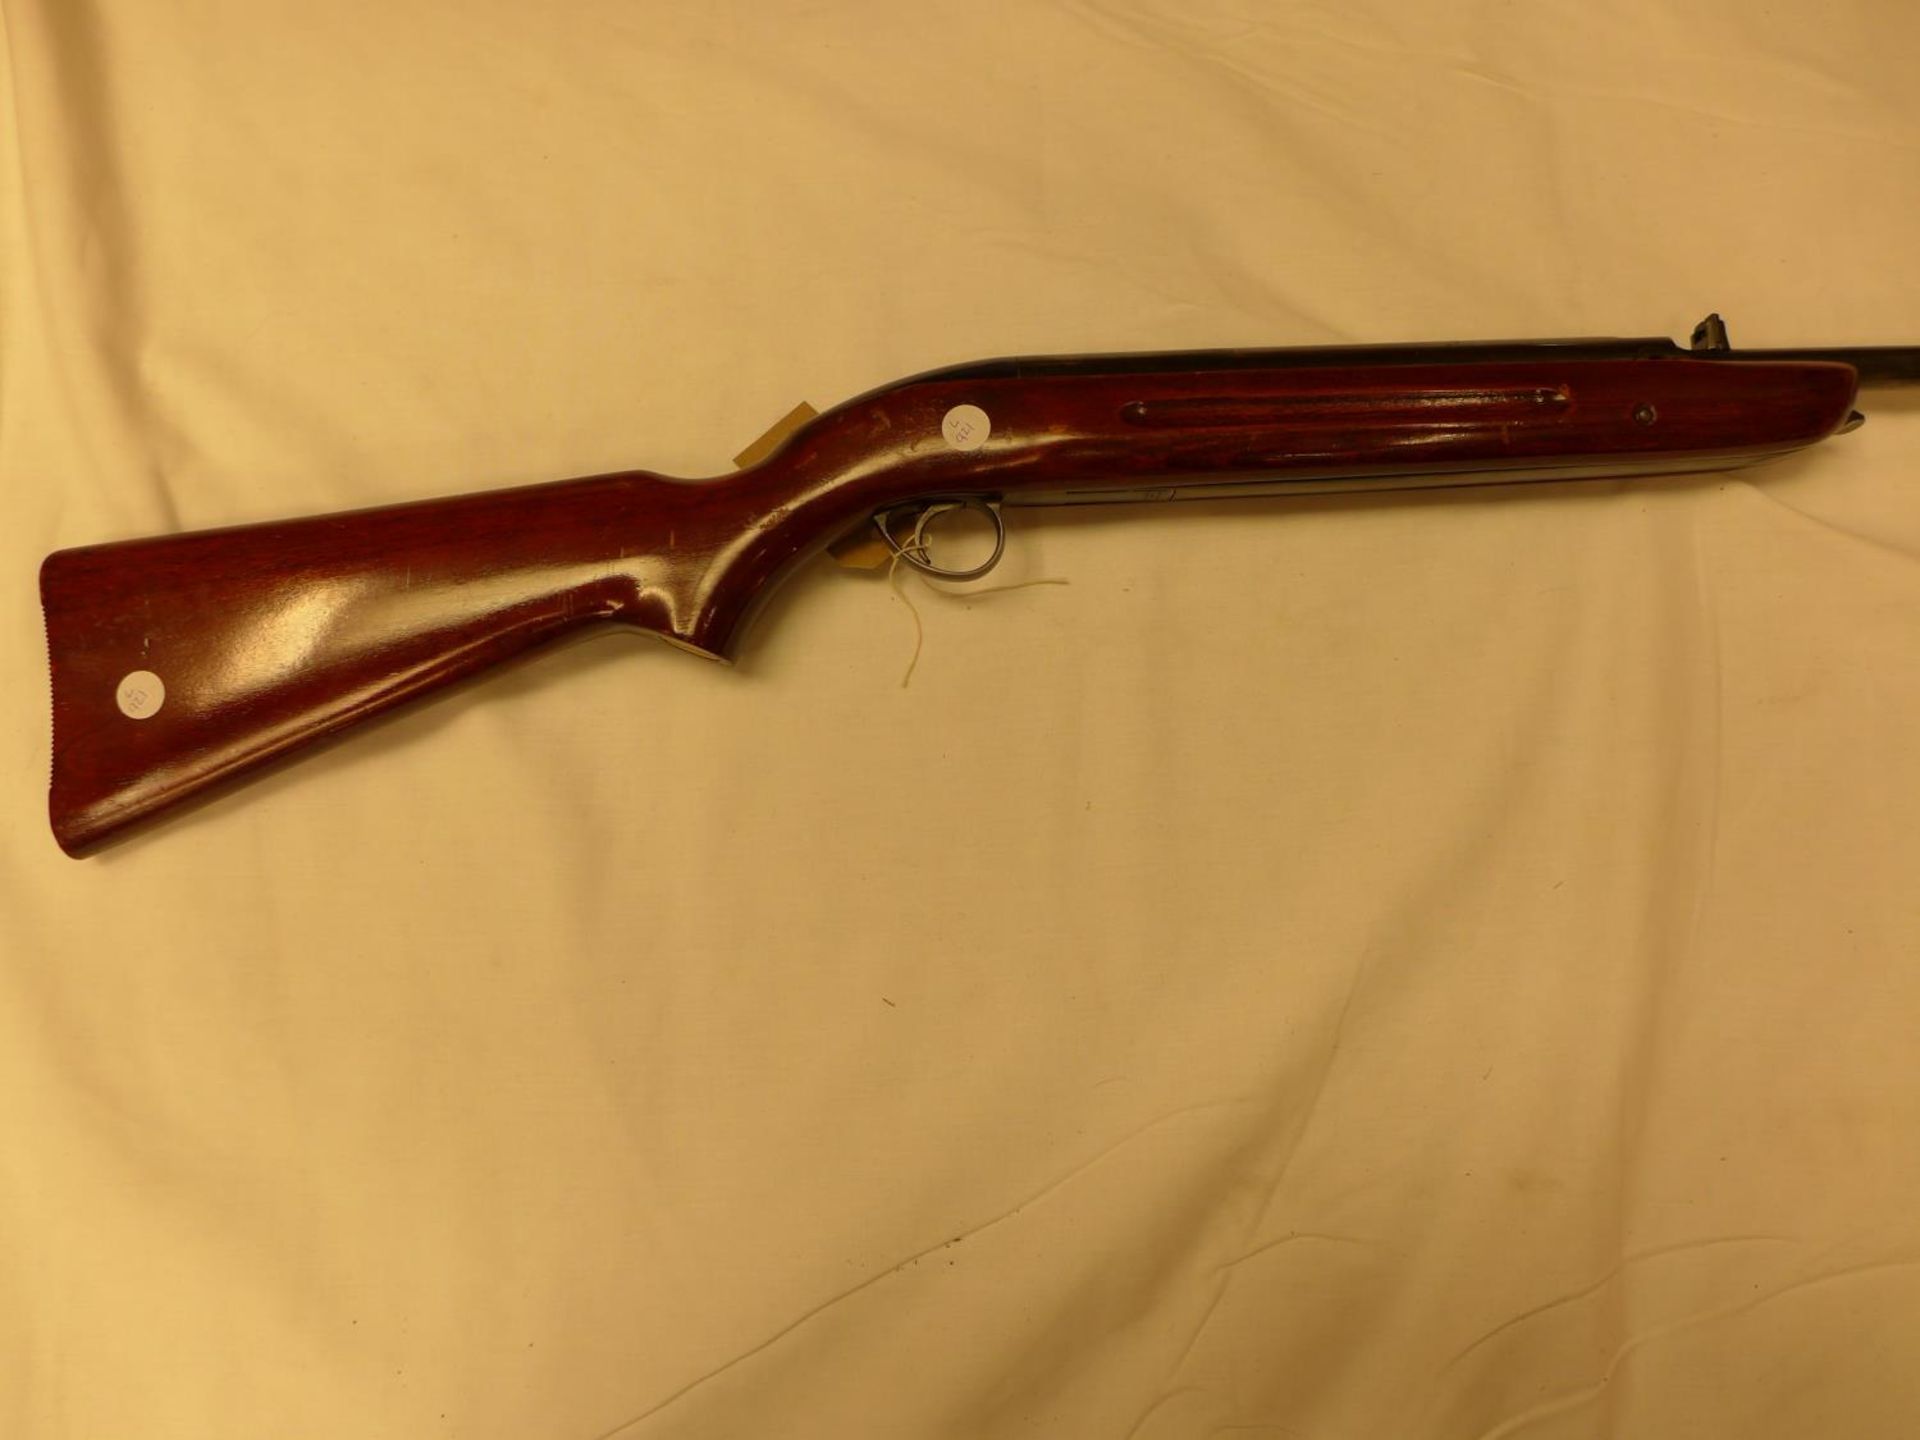 A B.S.A. 'AIRSPORTER' .22 CALBIRE UNDERLEVER AIR RIFLE, 47CM BARREL, WOODEN STOCK - Image 2 of 6